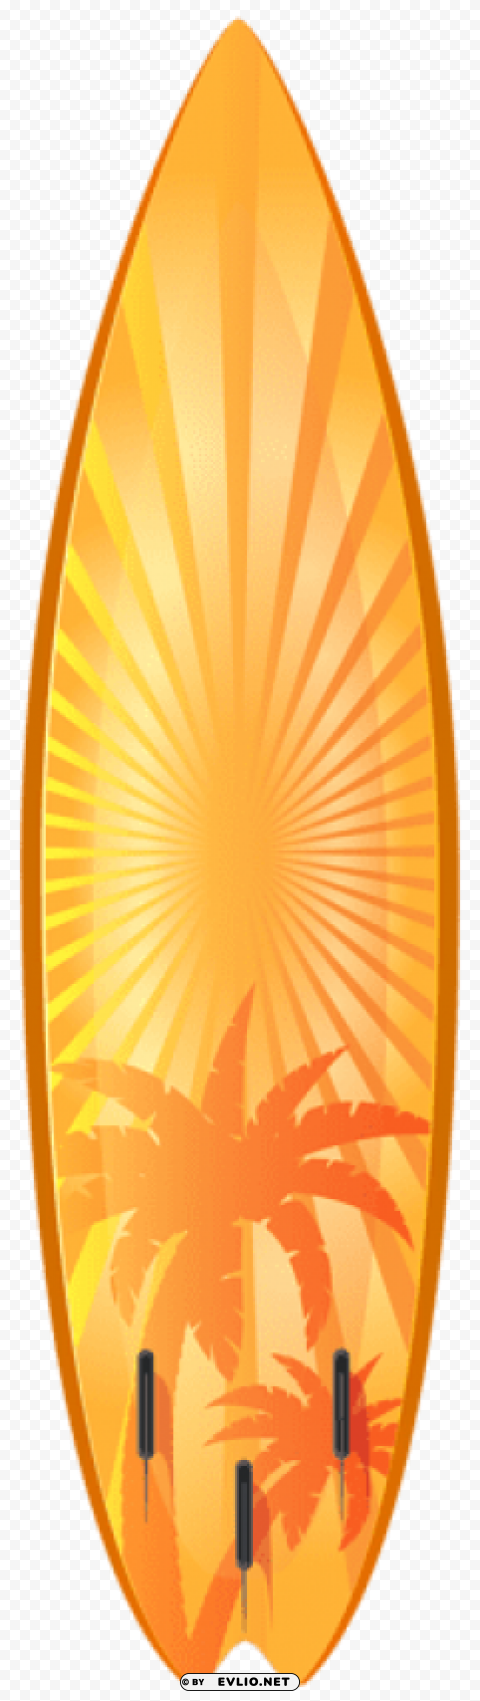 orange surfboard with palm trees PNG Image Isolated on Transparent Backdrop